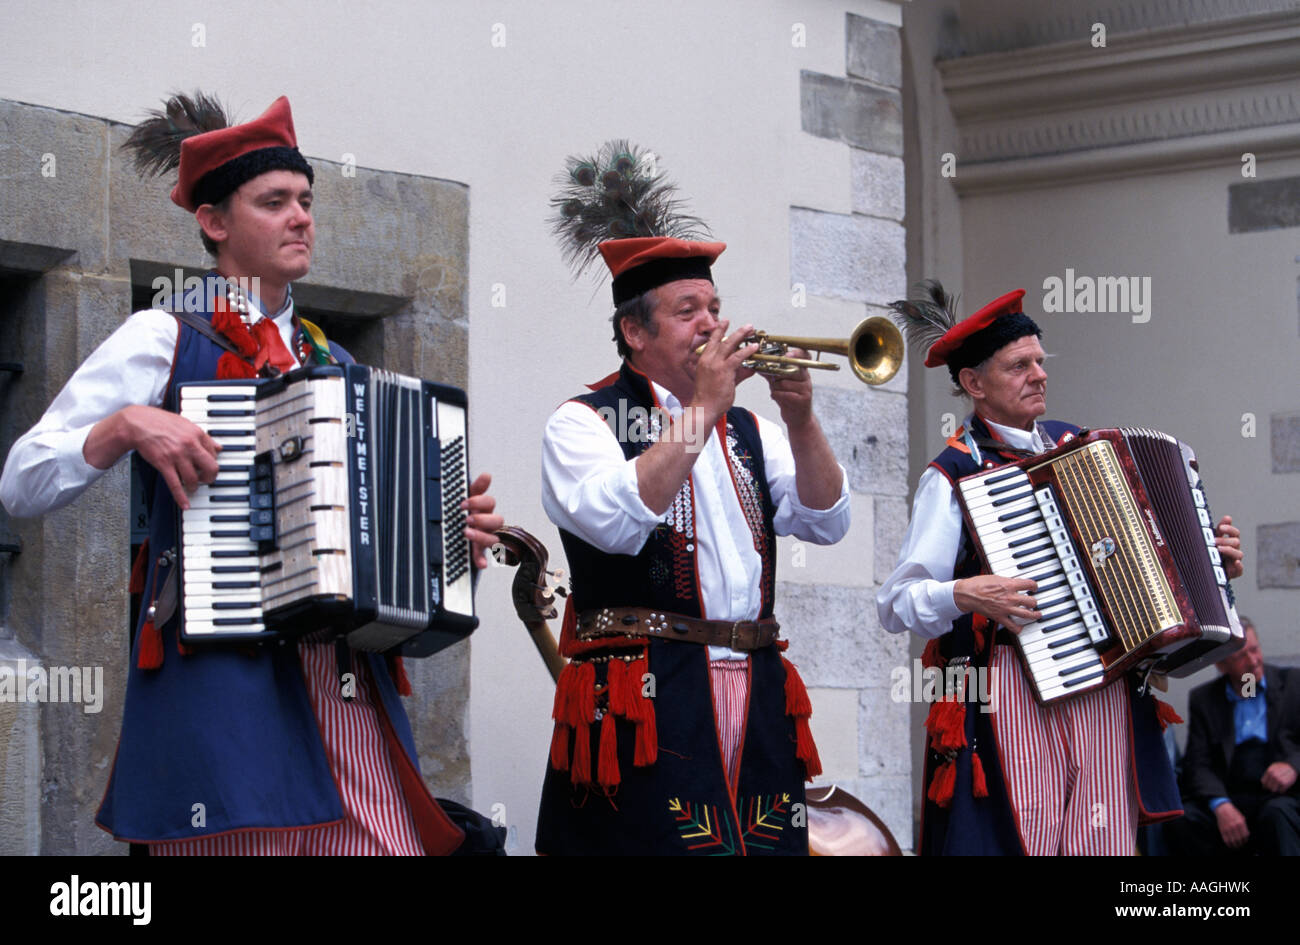 Musicians wearing traditional costumes main market square Kracow Lesser Poland Poland Stock Photo